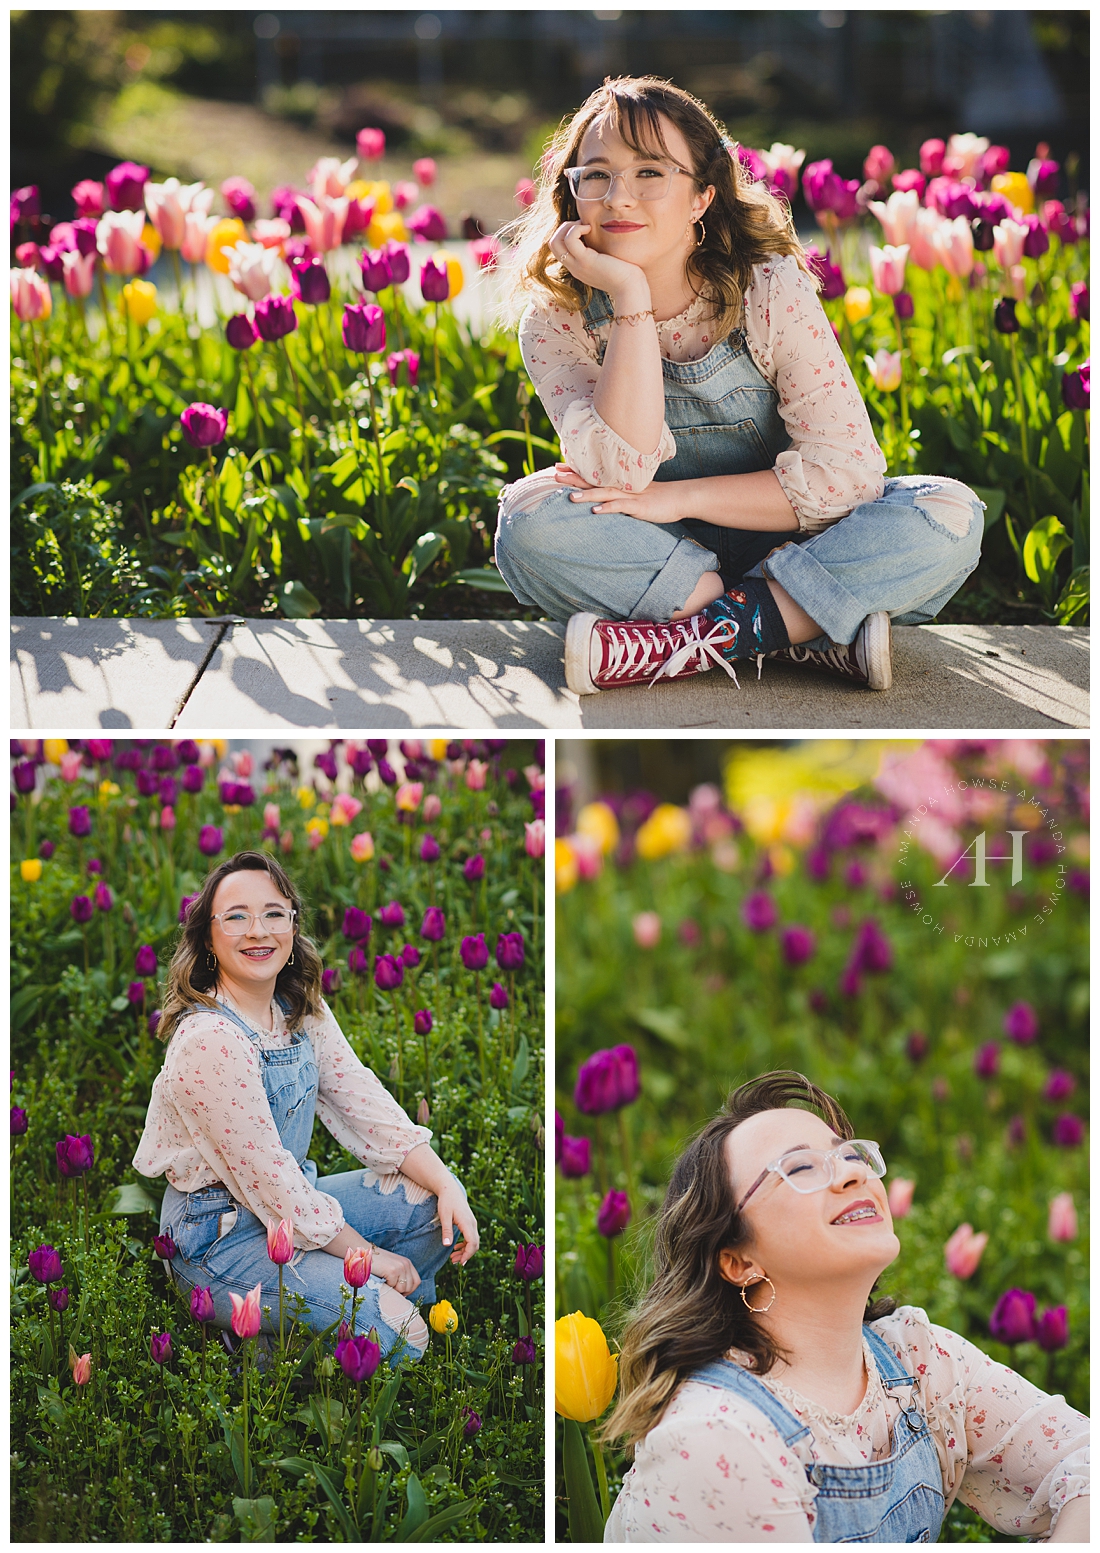 Spring Senior Portraits with Tulips | Blooms for Senior Portraits in Tacoma, Tulips, Spring Flowers for Senior Portraits | Photographed by the Best Tacoma Senior Photographer Amanda Howse Photography